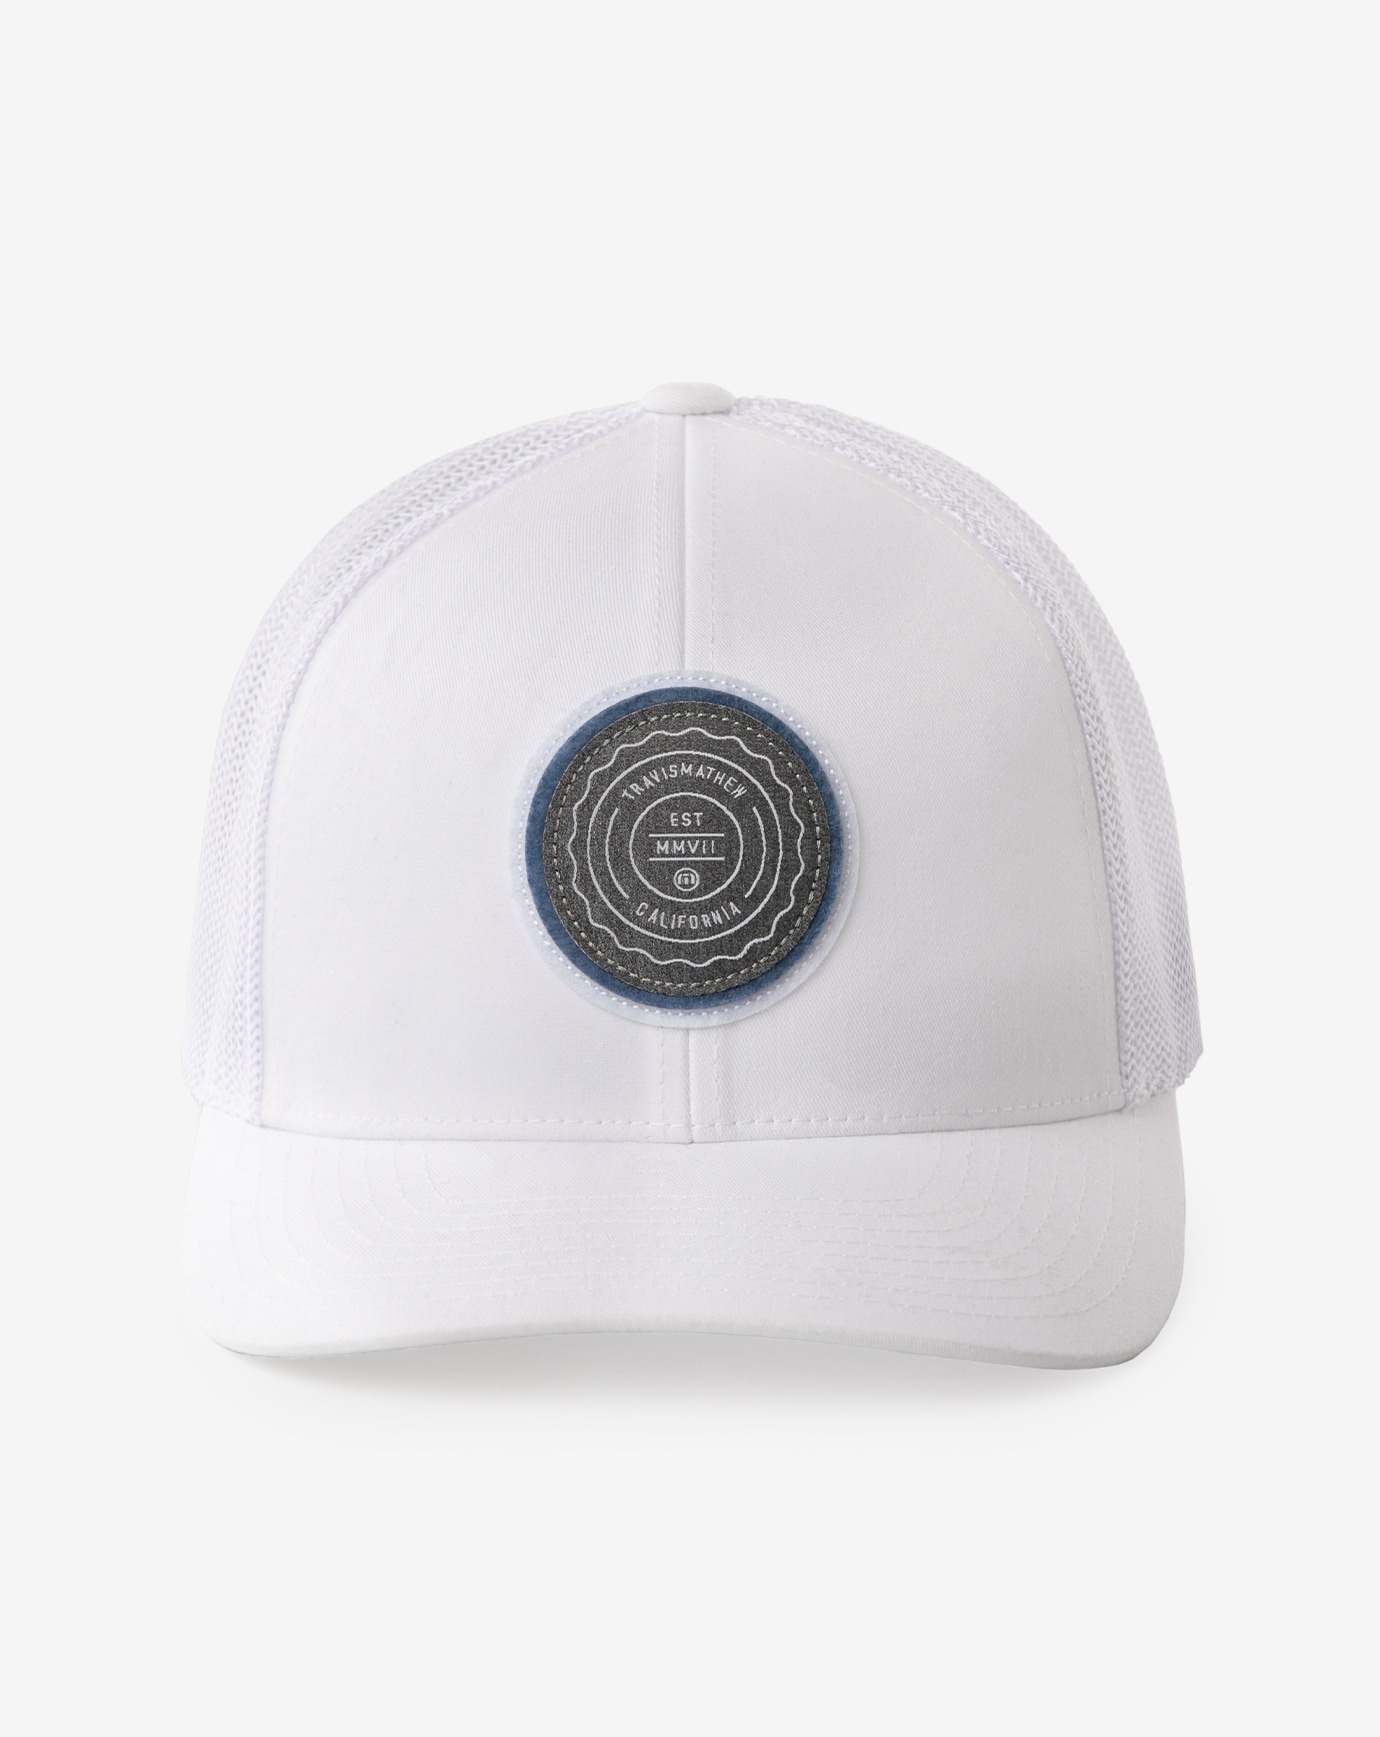 THE PATCH SNAPBACK HAT Image Thumbnail 1